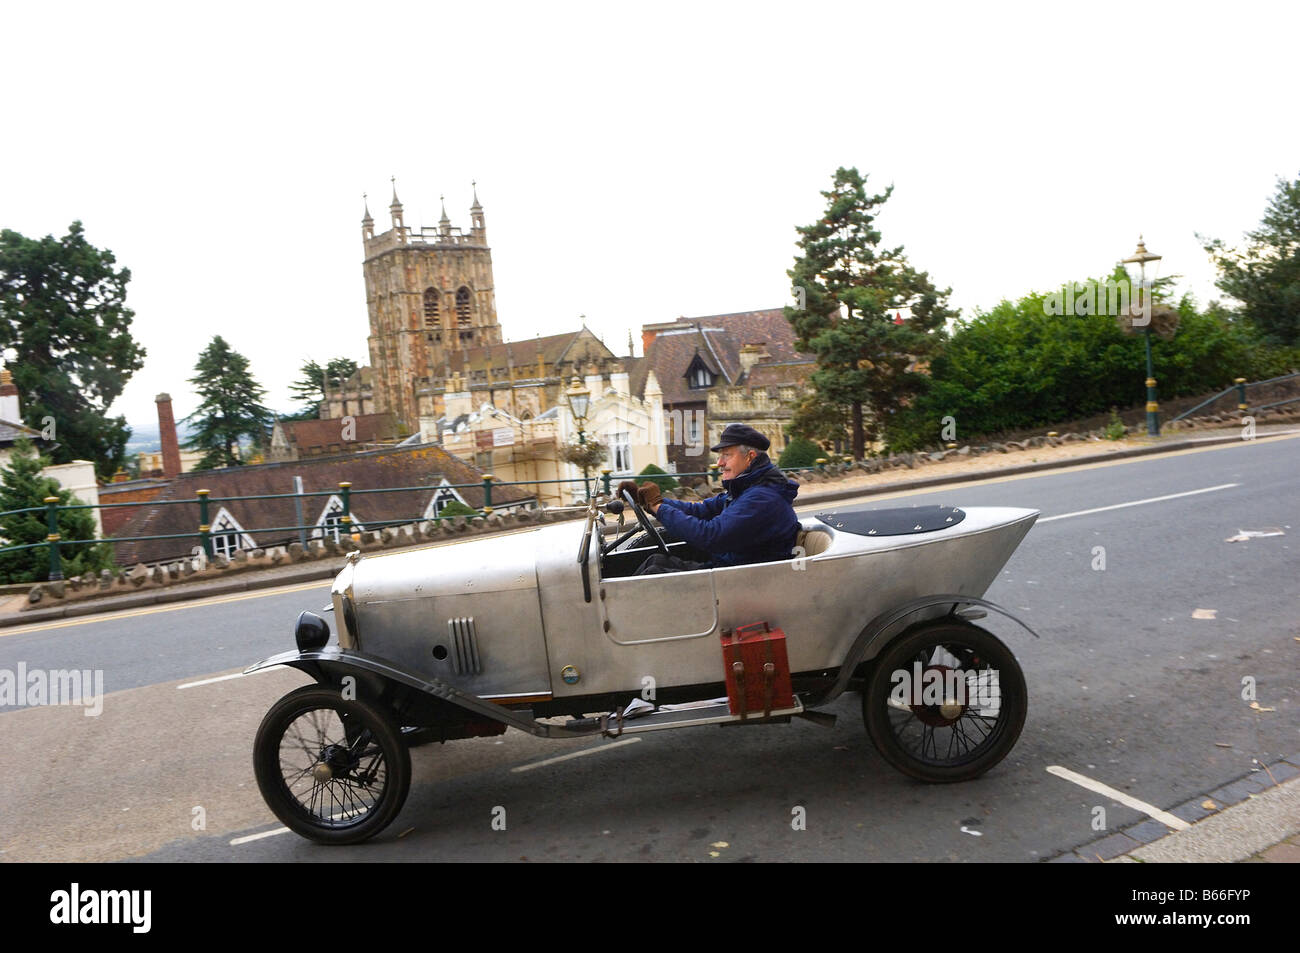 A veteran french Amilcar is seen against the backdrop of The Priory Malvern Worcestershire Great Britain Europe Stock Photo